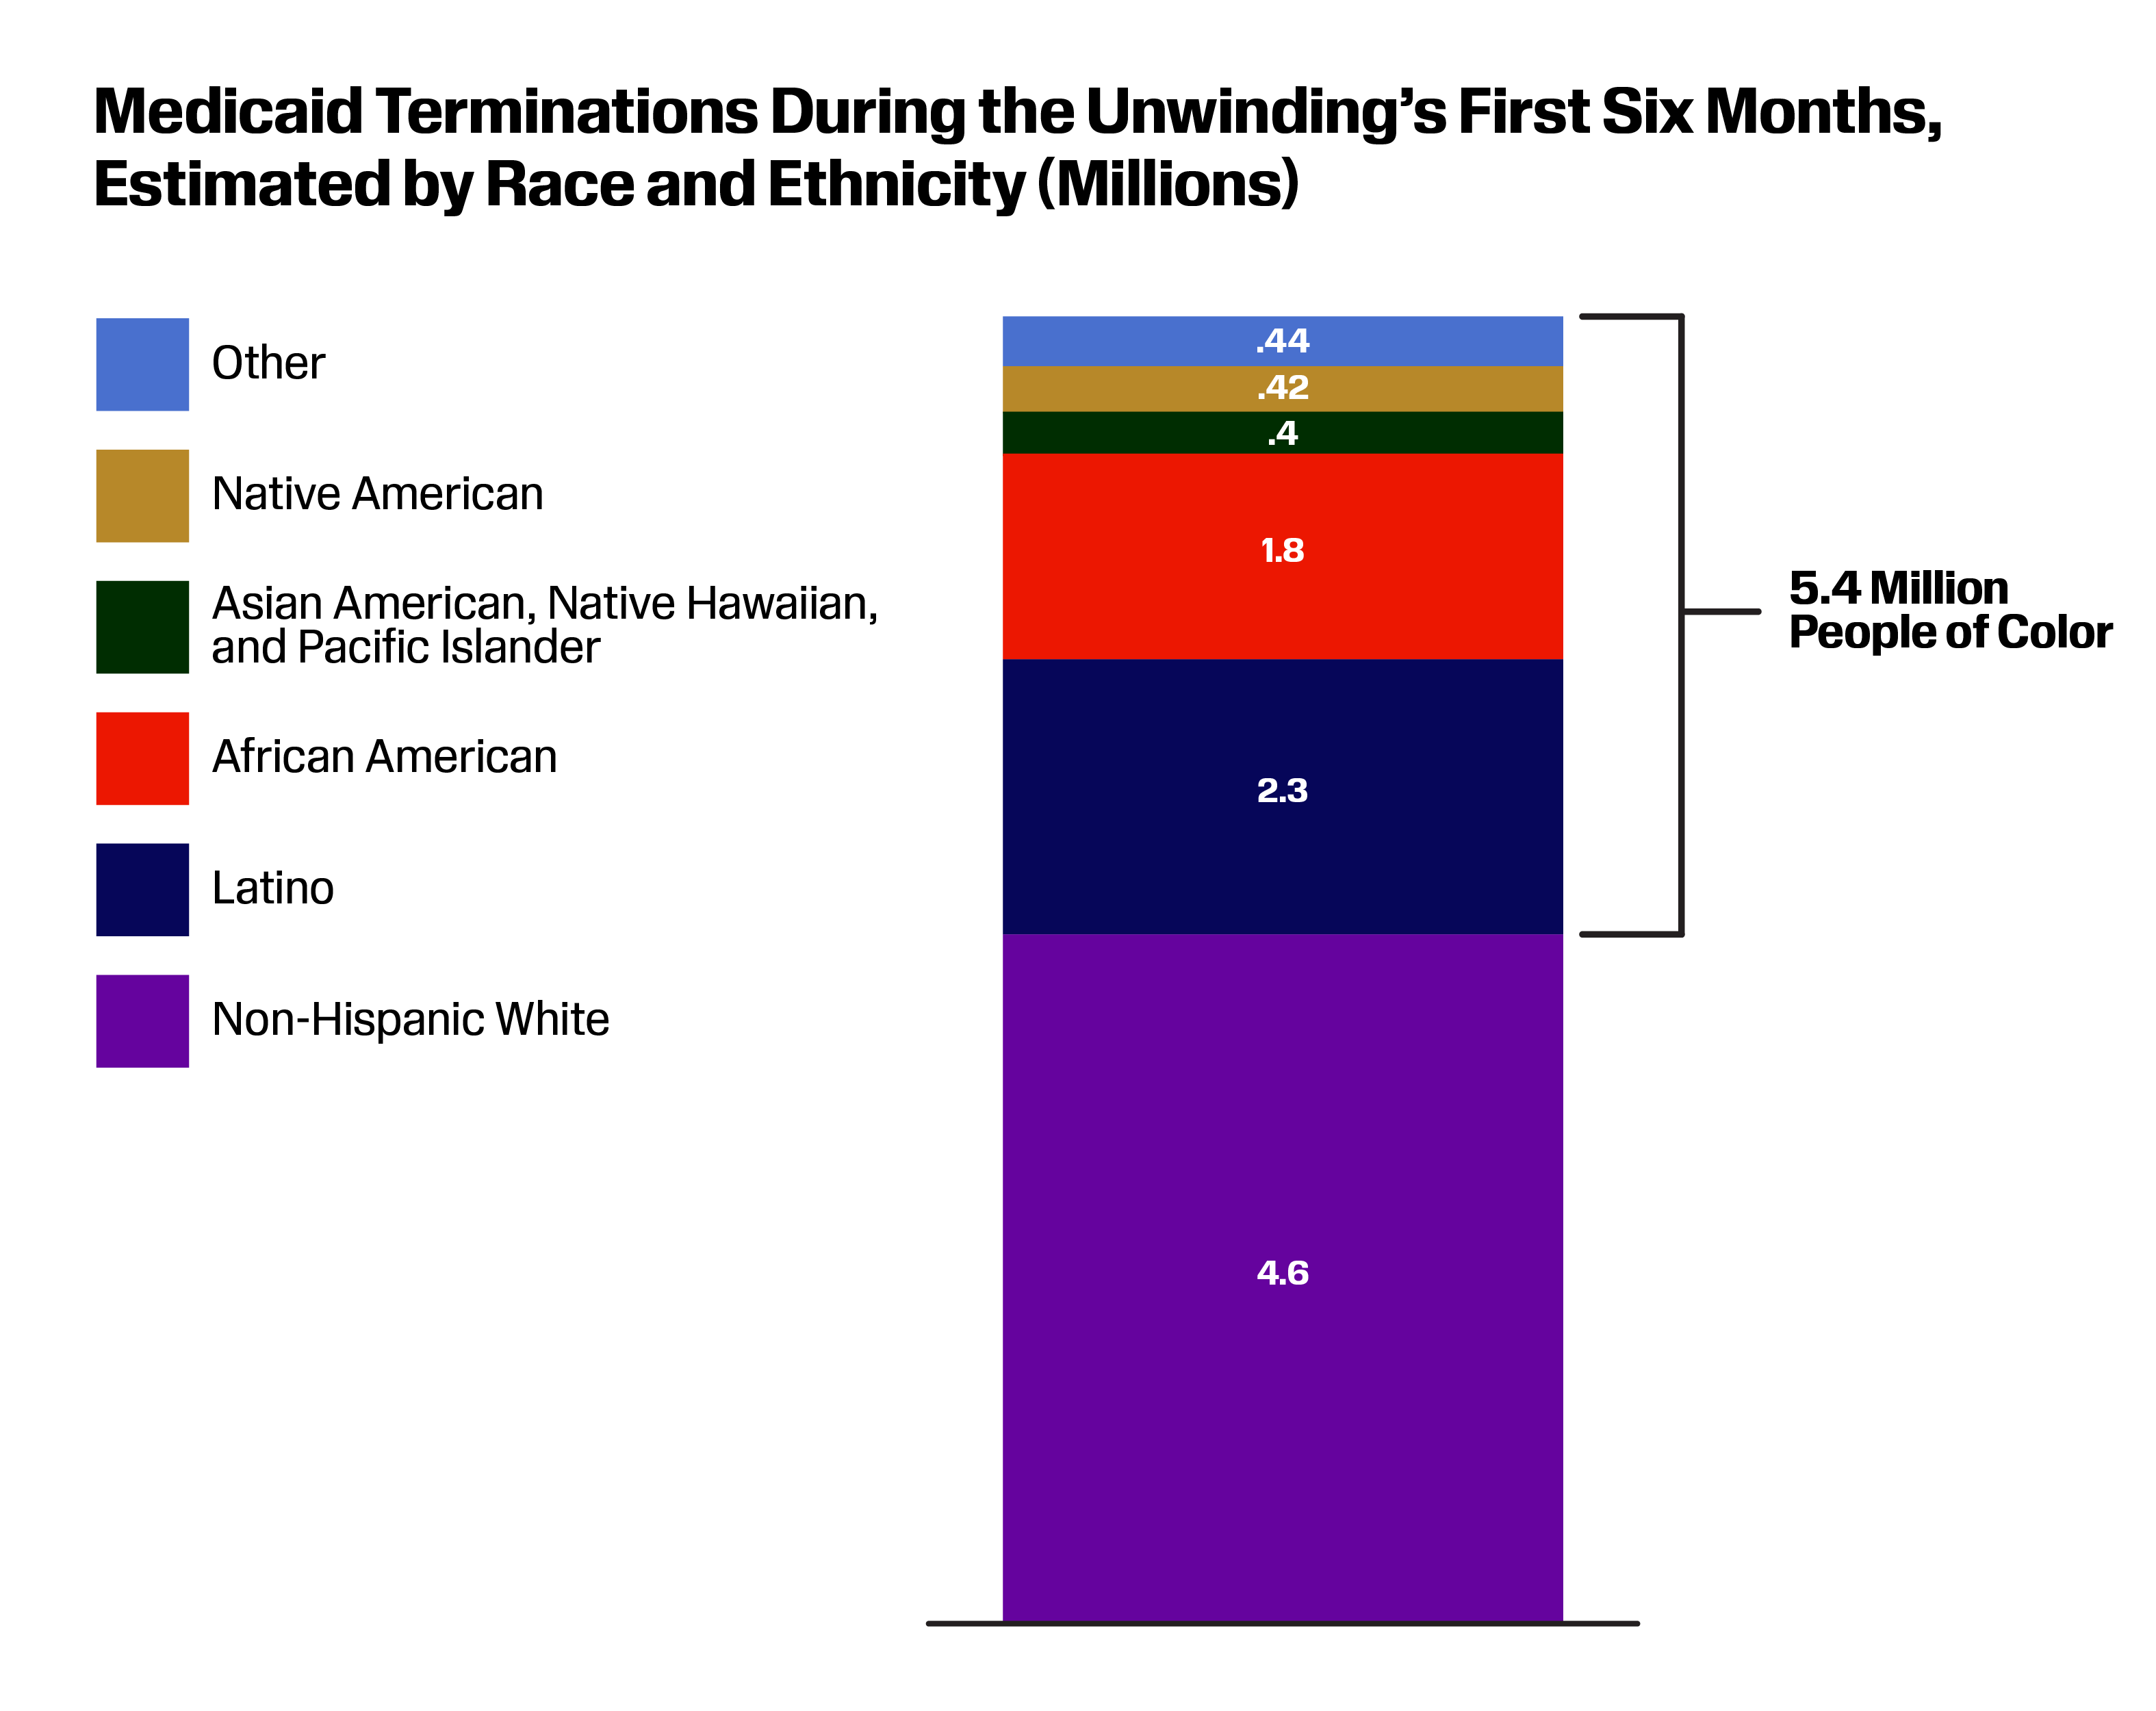 Bar chart of Medicaid representation by race and ethnicity in first six months since unwinding